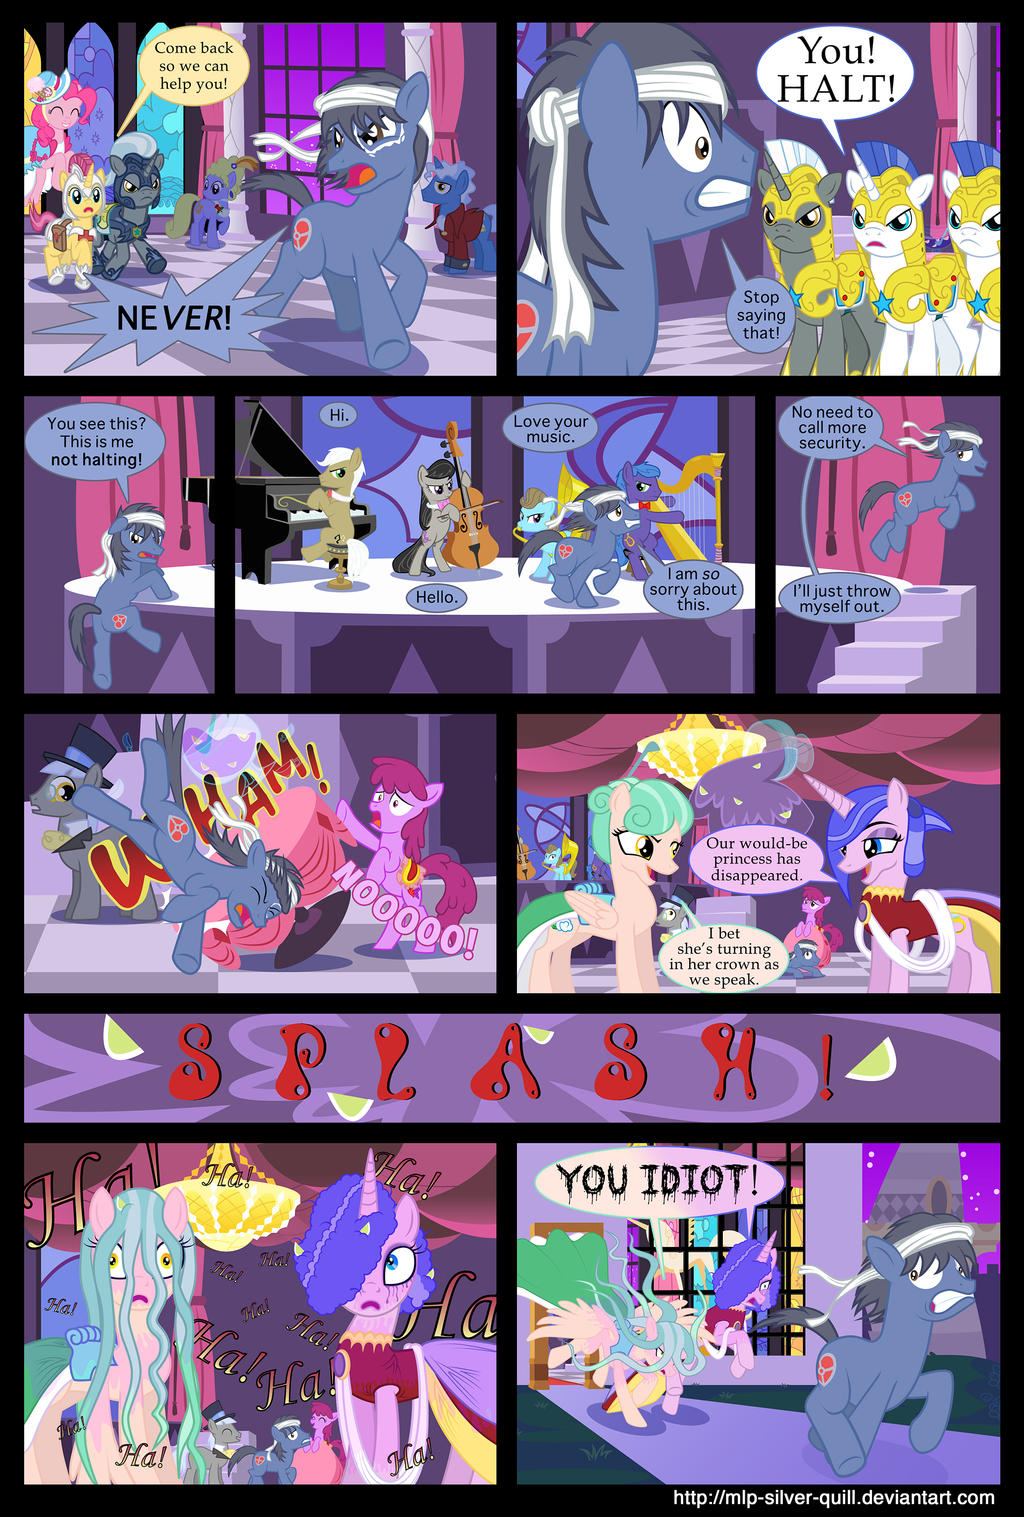 A Princess Tears Part 6 By Mlp Silver Quill On Deviantart